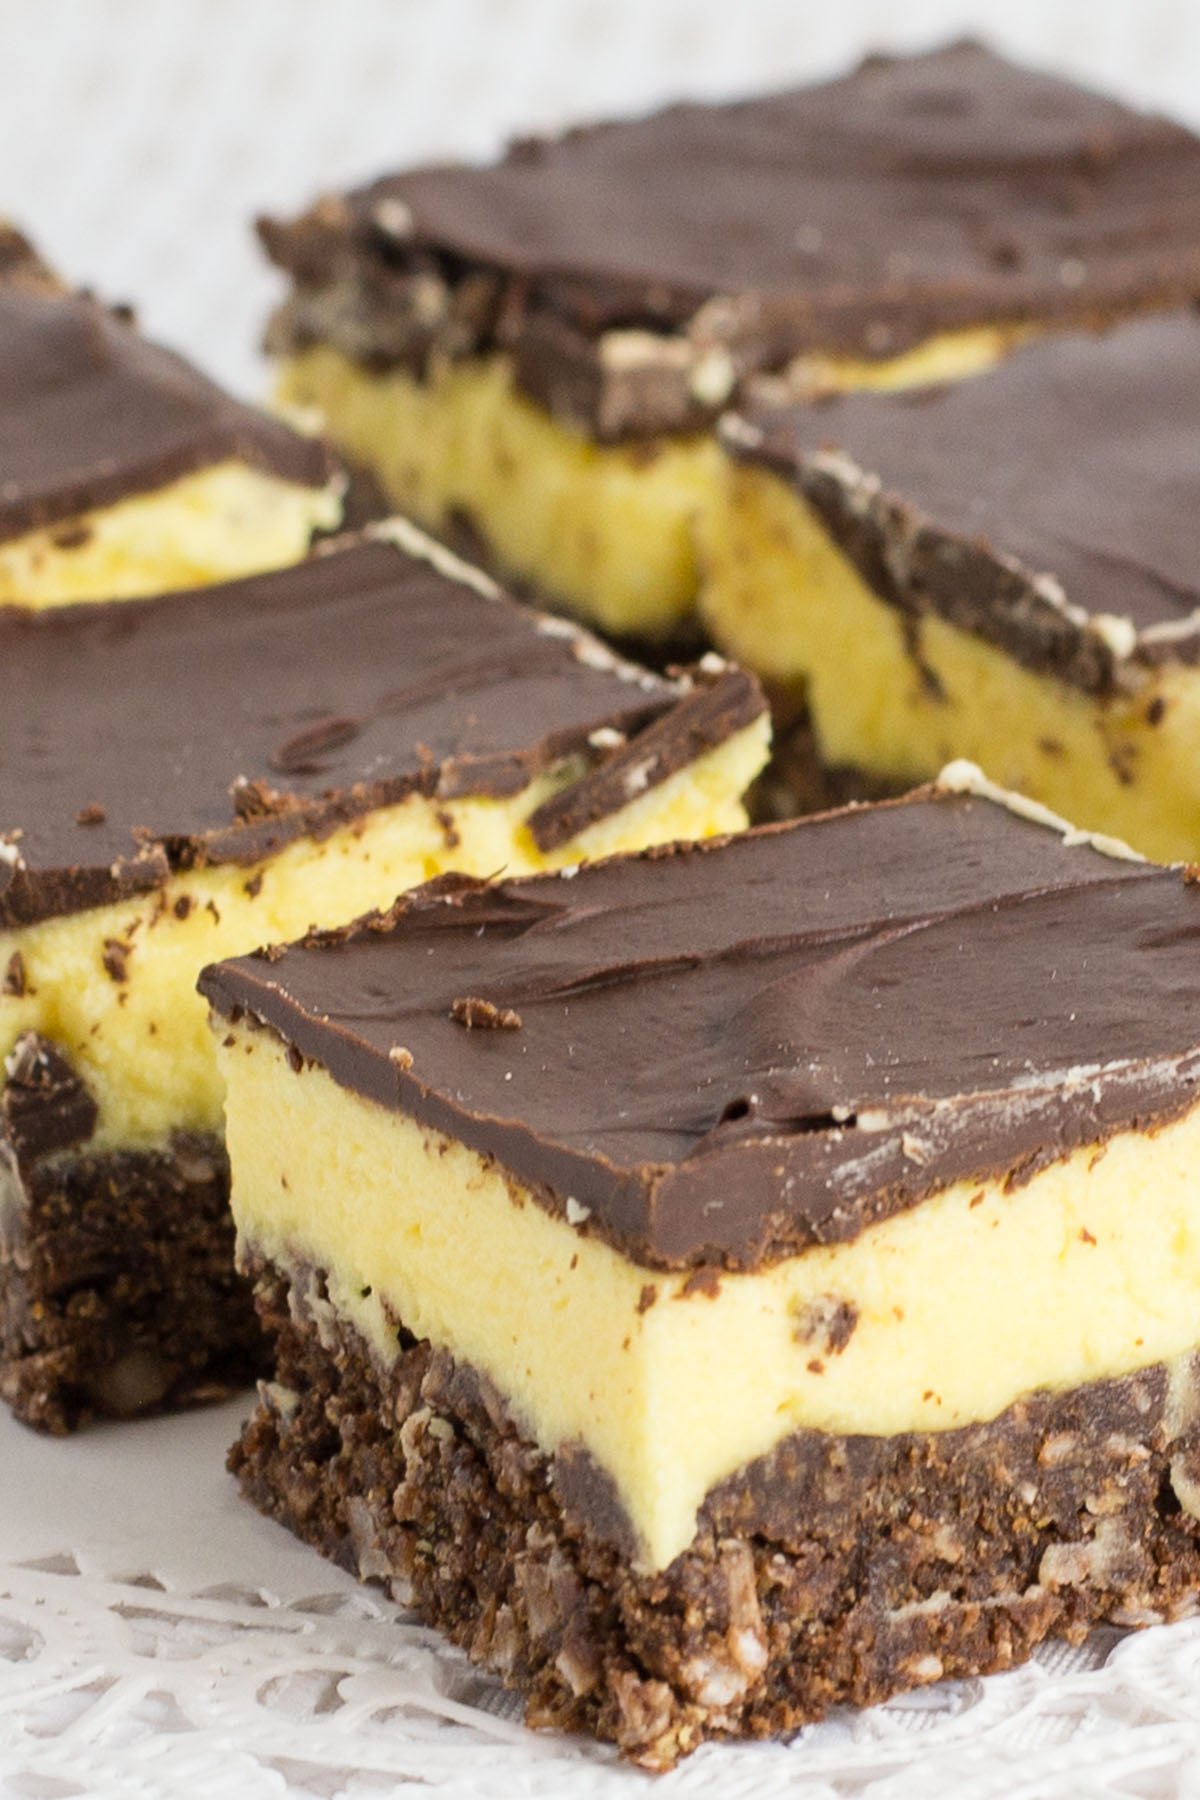 Rows of cut up Nanaimo bars made with layers of chocolate, yellow custard and chocolate coconut.